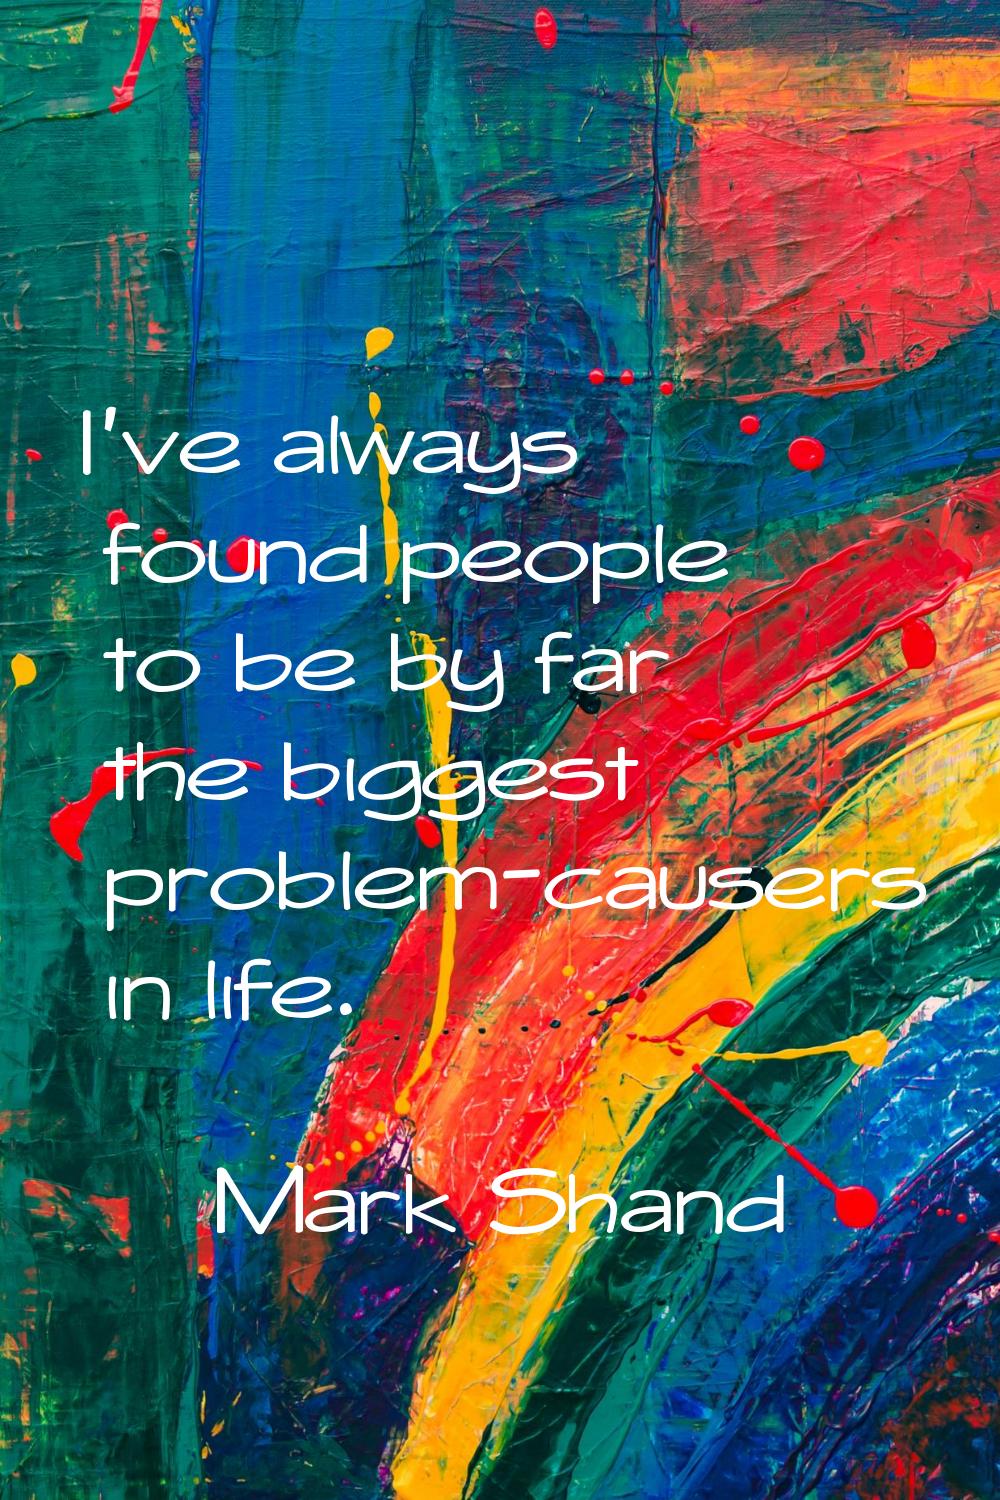 I've always found people to be by far the biggest problem-causers in life.